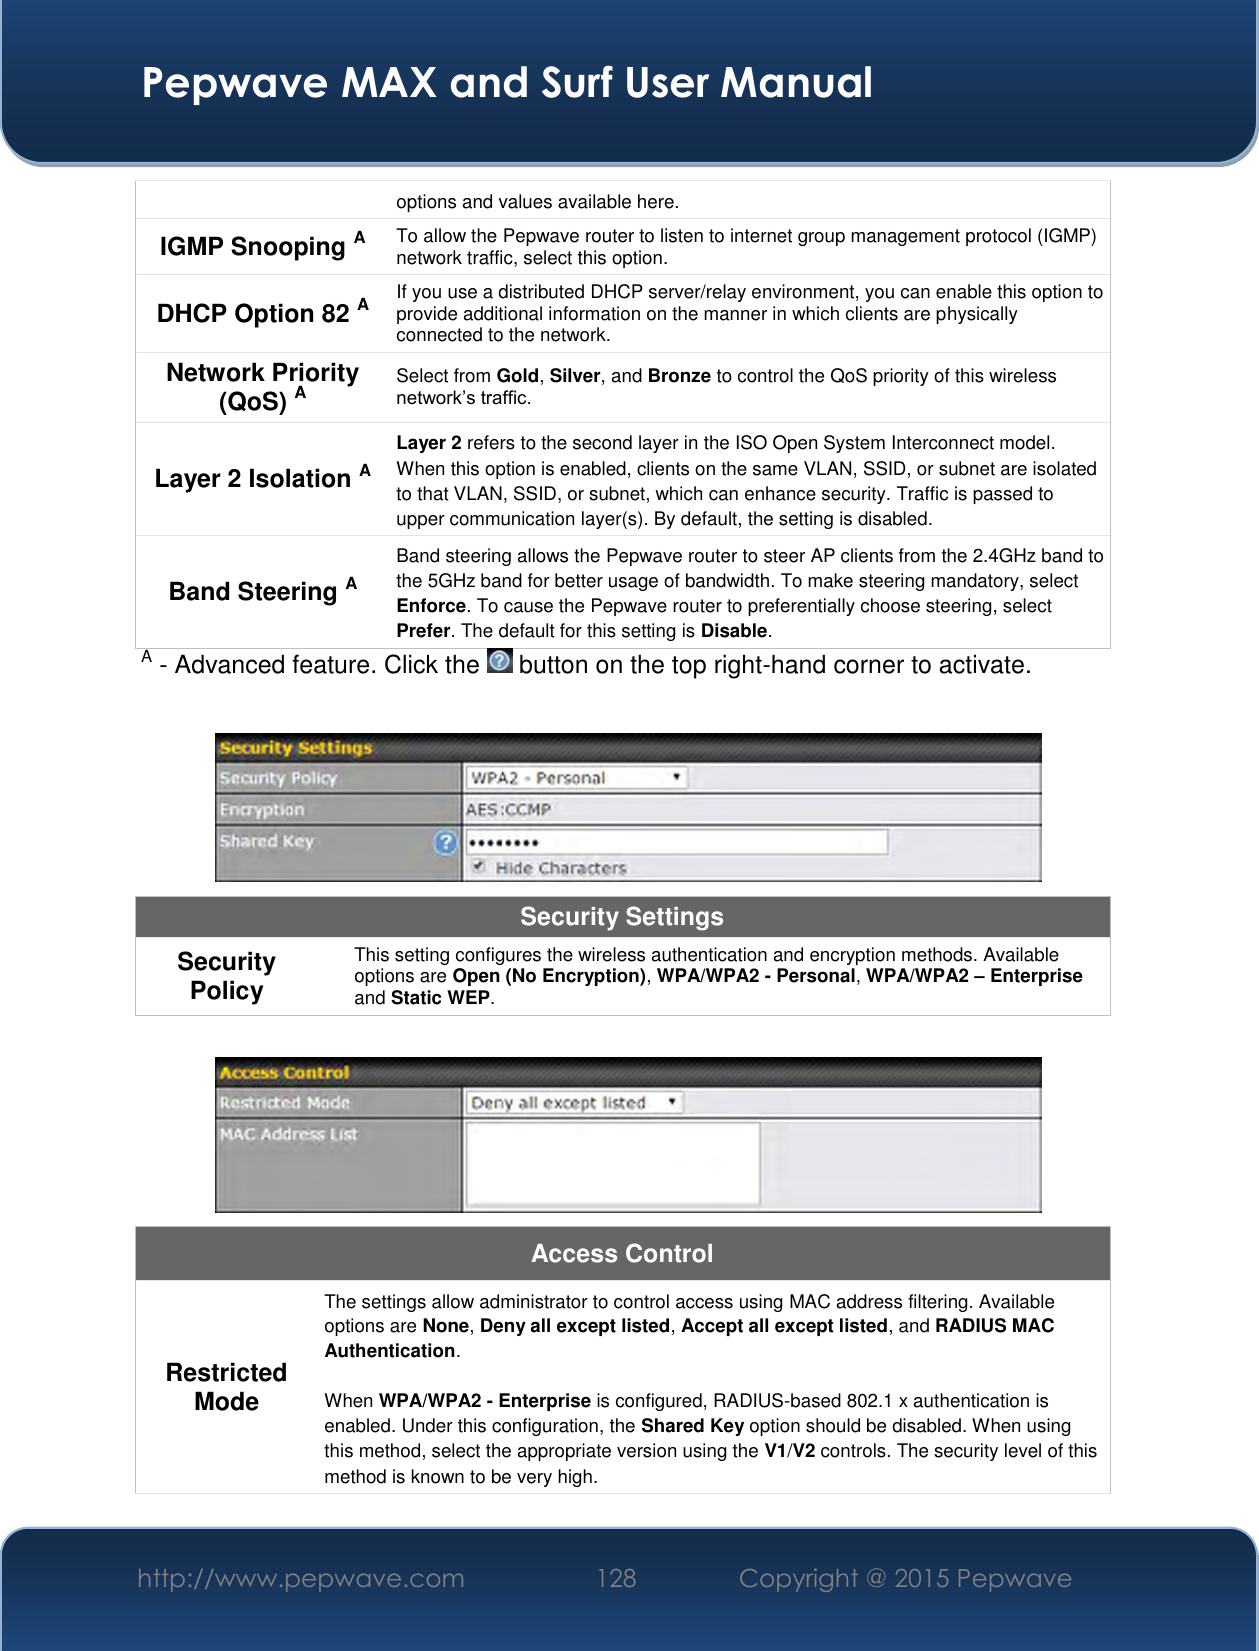  Pepwave MAX and Surf User Manual http://www.pepwave.com 128   Copyright @ 2015 Pepwave   options and values available here. IGMP Snooping A To allow the Pepwave router to listen to internet group management protocol (IGMP) network traffic, select this option. DHCP Option 82 A If you use a distributed DHCP server/relay environment, you can enable this option to provide additional information on the manner in which clients are physically connected to the network. Network Priority (QoS) A Select from Gold, Silver, and Bronze to control the QoS priority of this wireless network’s traffic. Layer 2 Isolation A Layer 2 refers to the second layer in the ISO Open System Interconnect model. When this option is enabled, clients on the same VLAN, SSID, or subnet are isolated to that VLAN, SSID, or subnet, which can enhance security. Traffic is passed to upper communication layer(s). By default, the setting is disabled.  Band Steering A Band steering allows the Pepwave router to steer AP clients from the 2.4GHz band to the 5GHz band for better usage of bandwidth. To make steering mandatory, select Enforce. To cause the Pepwave router to preferentially choose steering, select Prefer. The default for this setting is Disable. A - Advanced feature. Click the   button on the top right-hand corner to activate.   Security Settings Security Policy This setting configures the wireless authentication and encryption methods. Available options are Open (No Encryption), WPA/WPA2 - Personal, WPA/WPA2 – Enterprise and Static WEP.   Access Control Restricted Mode The settings allow administrator to control access using MAC address filtering. Available options are None, Deny all except listed, Accept all except listed, and RADIUS MAC Authentication.  When WPA/WPA2 - Enterprise is configured, RADIUS-based 802.1 x authentication is enabled. Under this configuration, the Shared Key option should be disabled. When using this method, select the appropriate version using the V1/V2 controls. The security level of this method is known to be very high. 